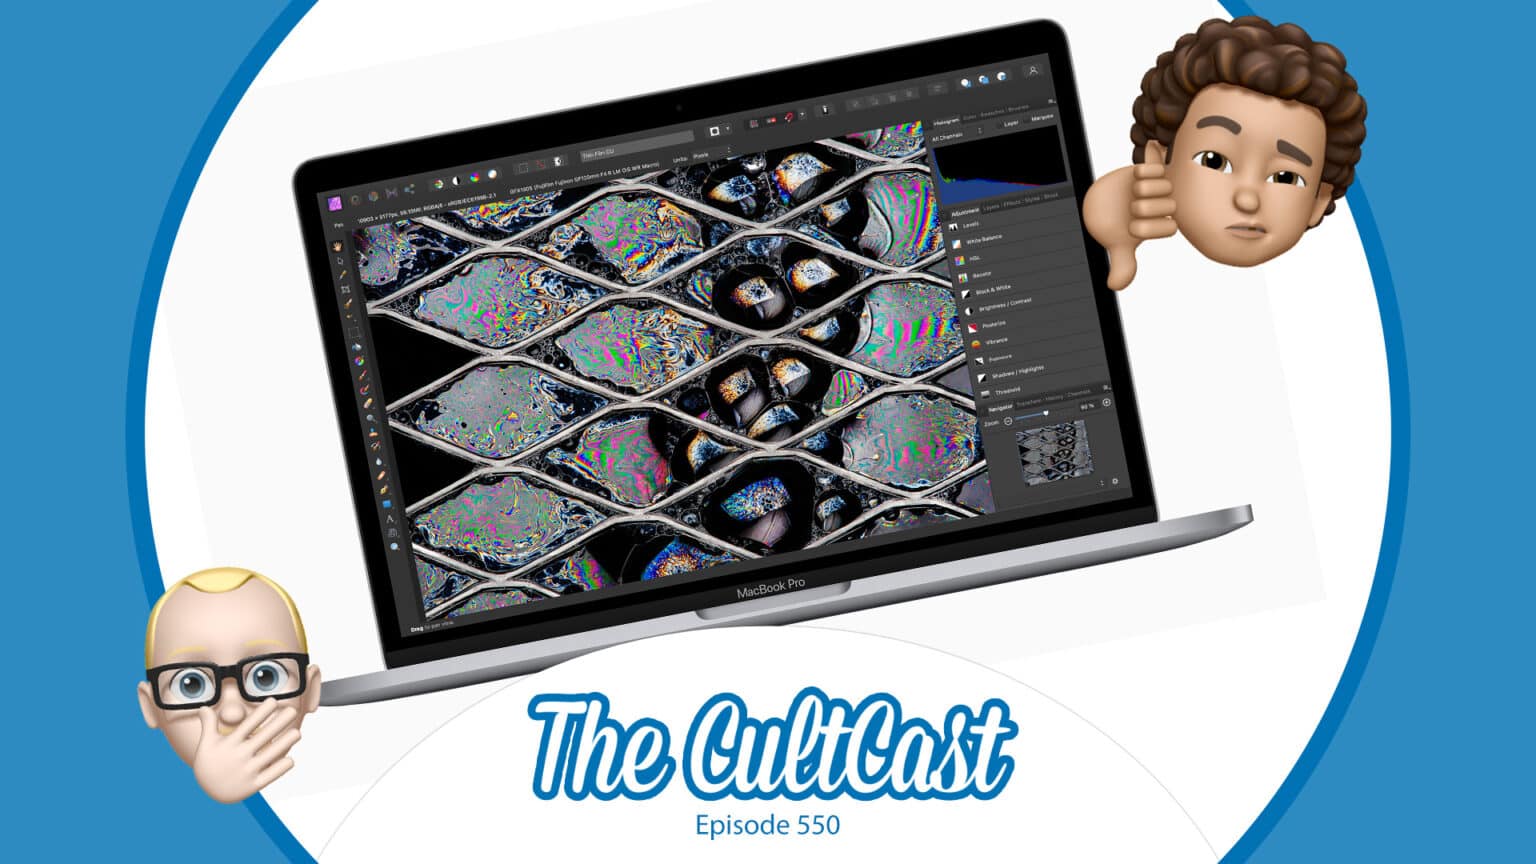 The CultCast 550 Apple podcast: There are very few reasons why anybody should buy the new MacBook Pro.